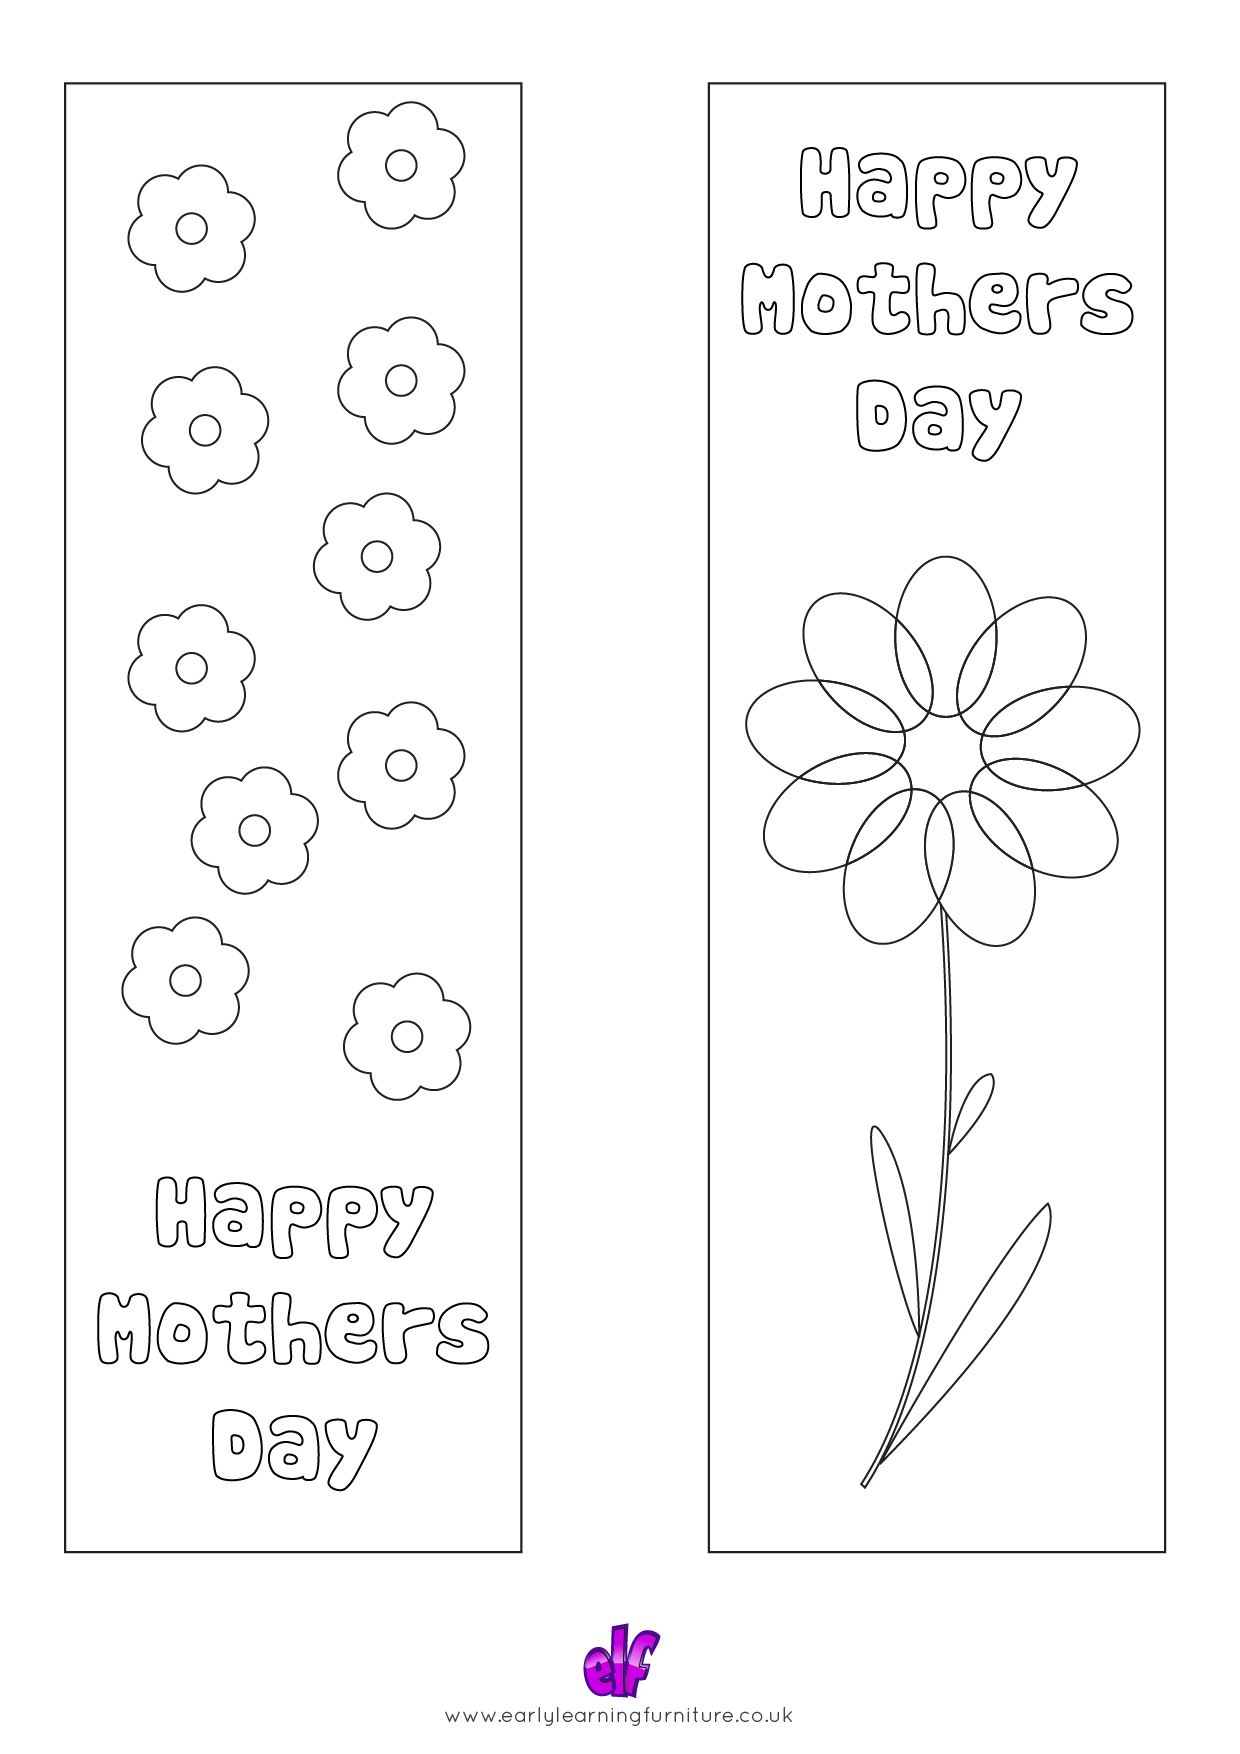 mother-s-day-printable-worksheets-printable-word-searches